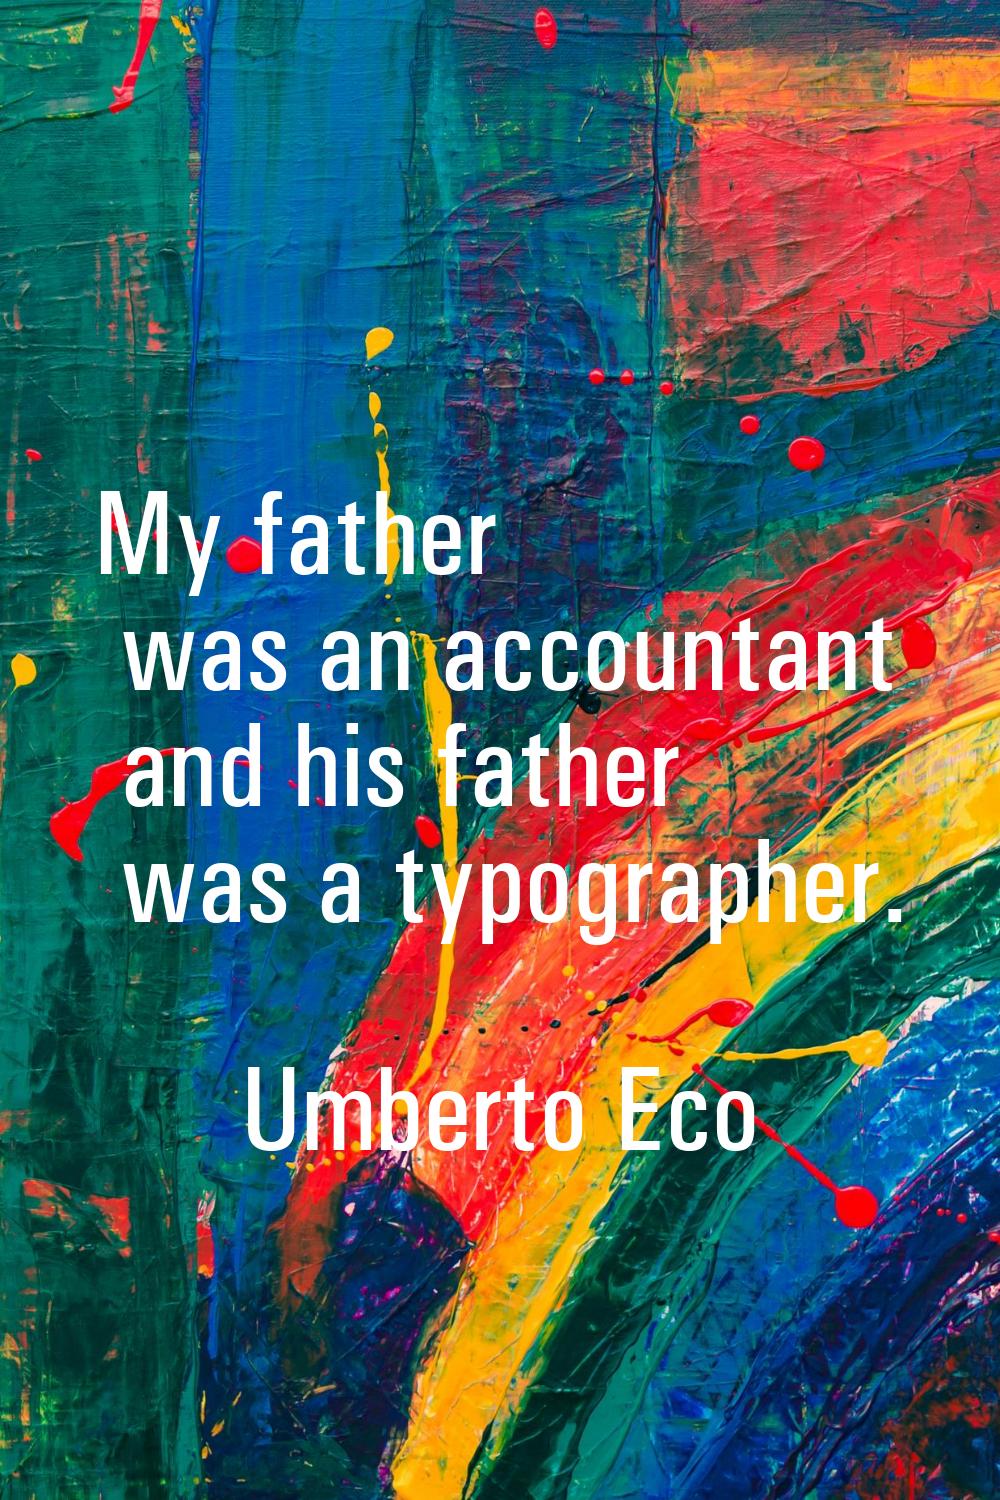 My father was an accountant and his father was a typographer.